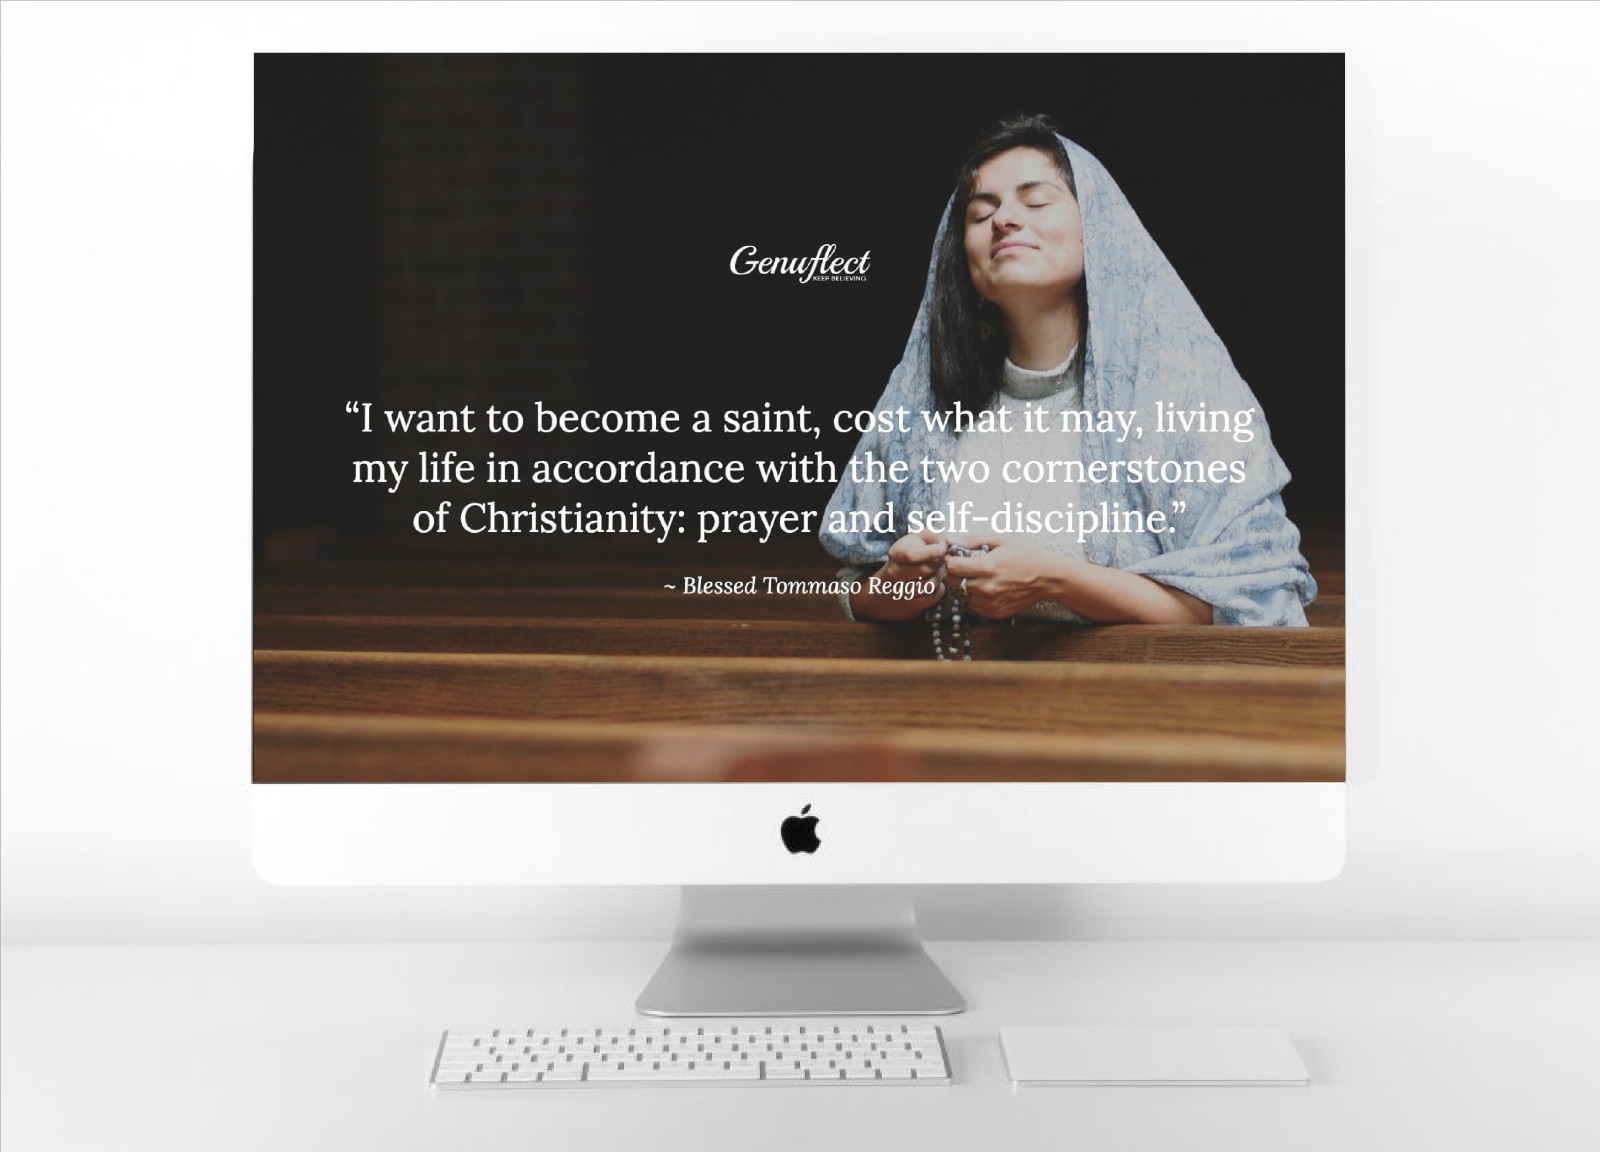 Genuflect image on computer woman kneeling in church praying the Rosary